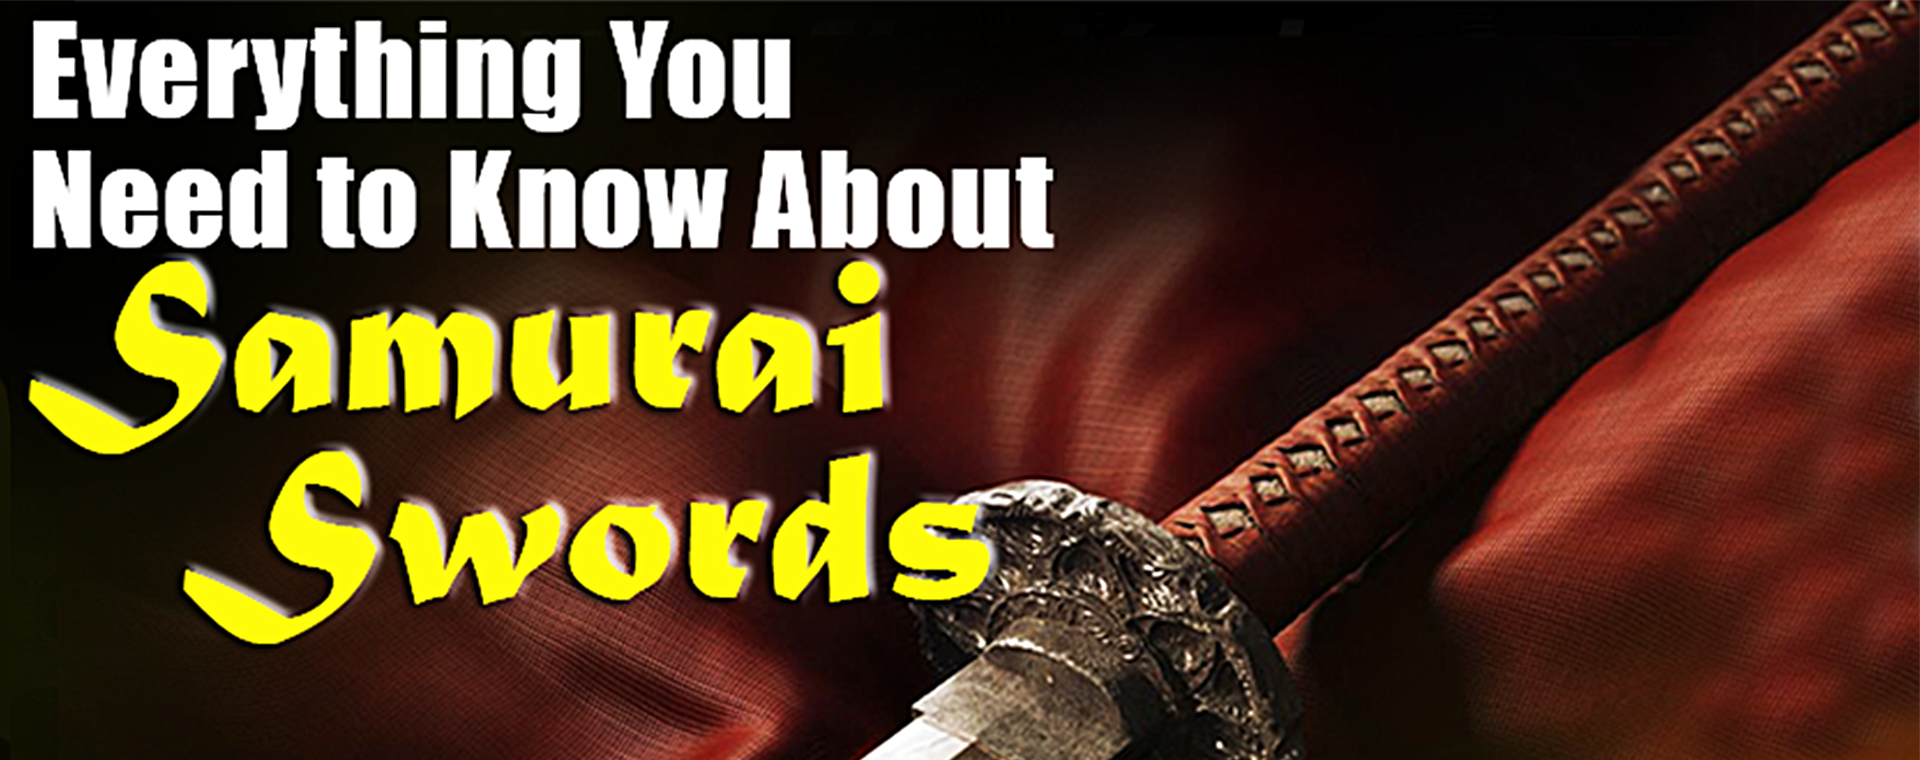 Everything You Need to Know About Samurai Swords